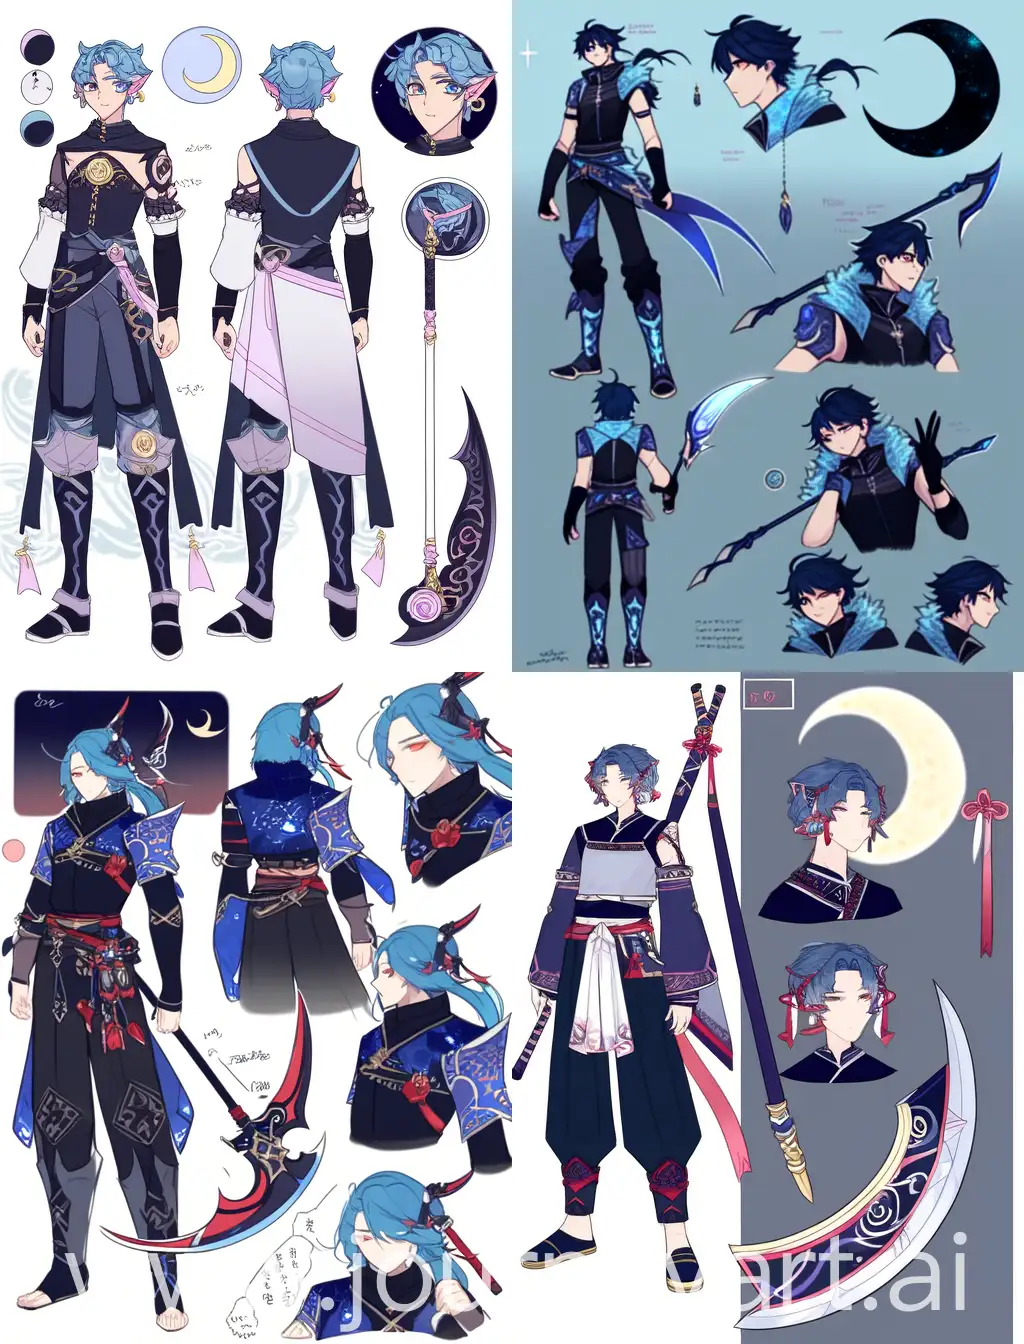 Slavic-Anime-Character-with-Blue-Hair-and-Scythe-Weapon